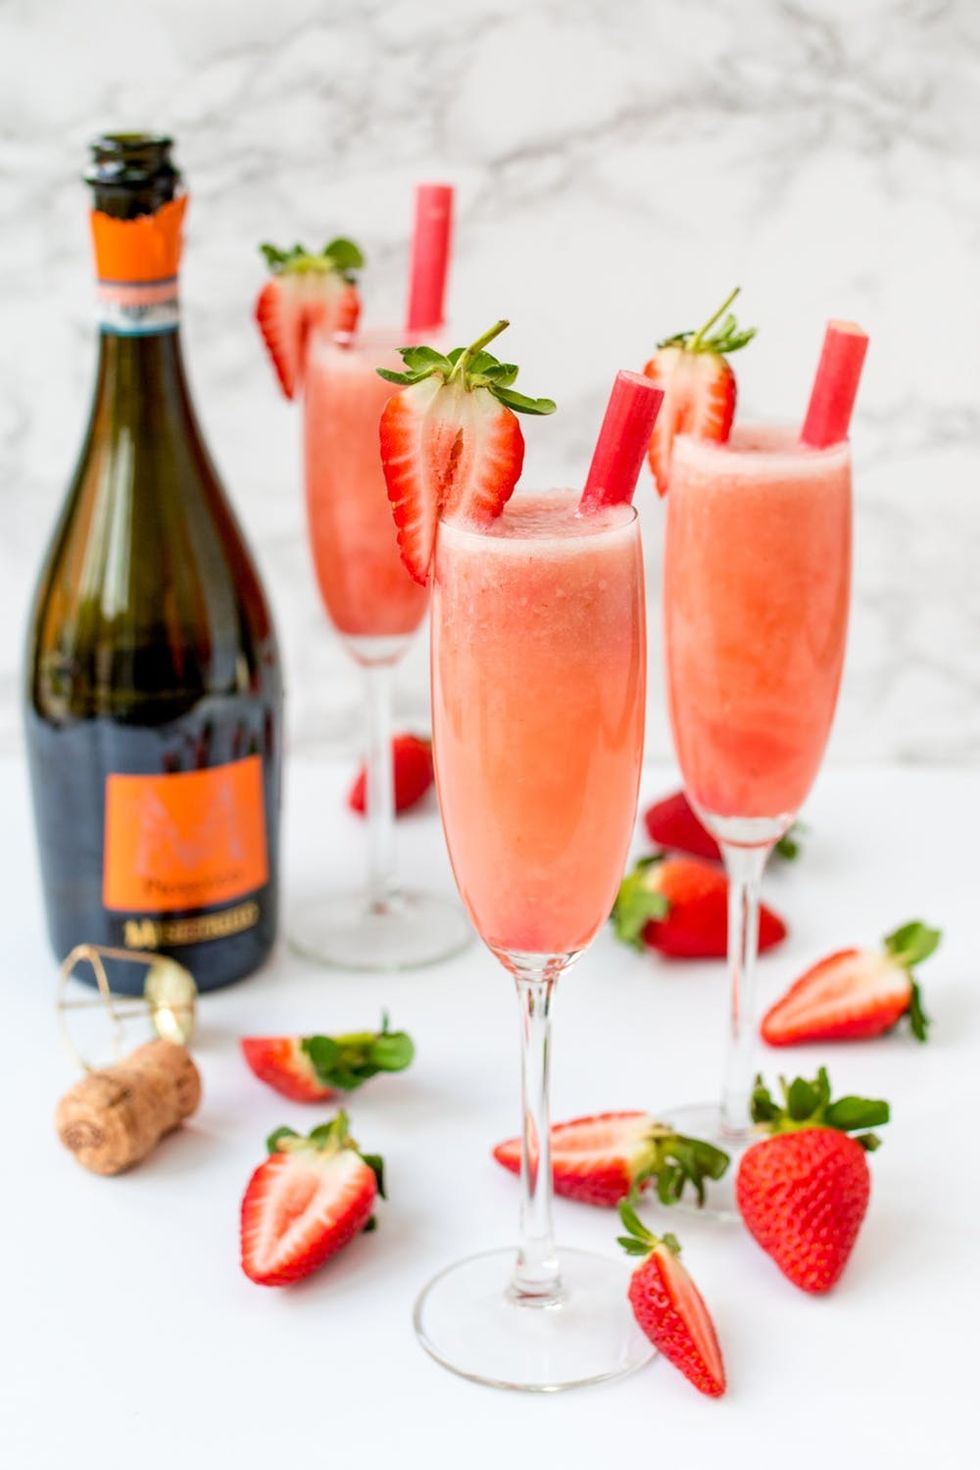 These Strawberry And Rhubarb Bellinis Make A Classy Cocktail For Your Oscars Party!